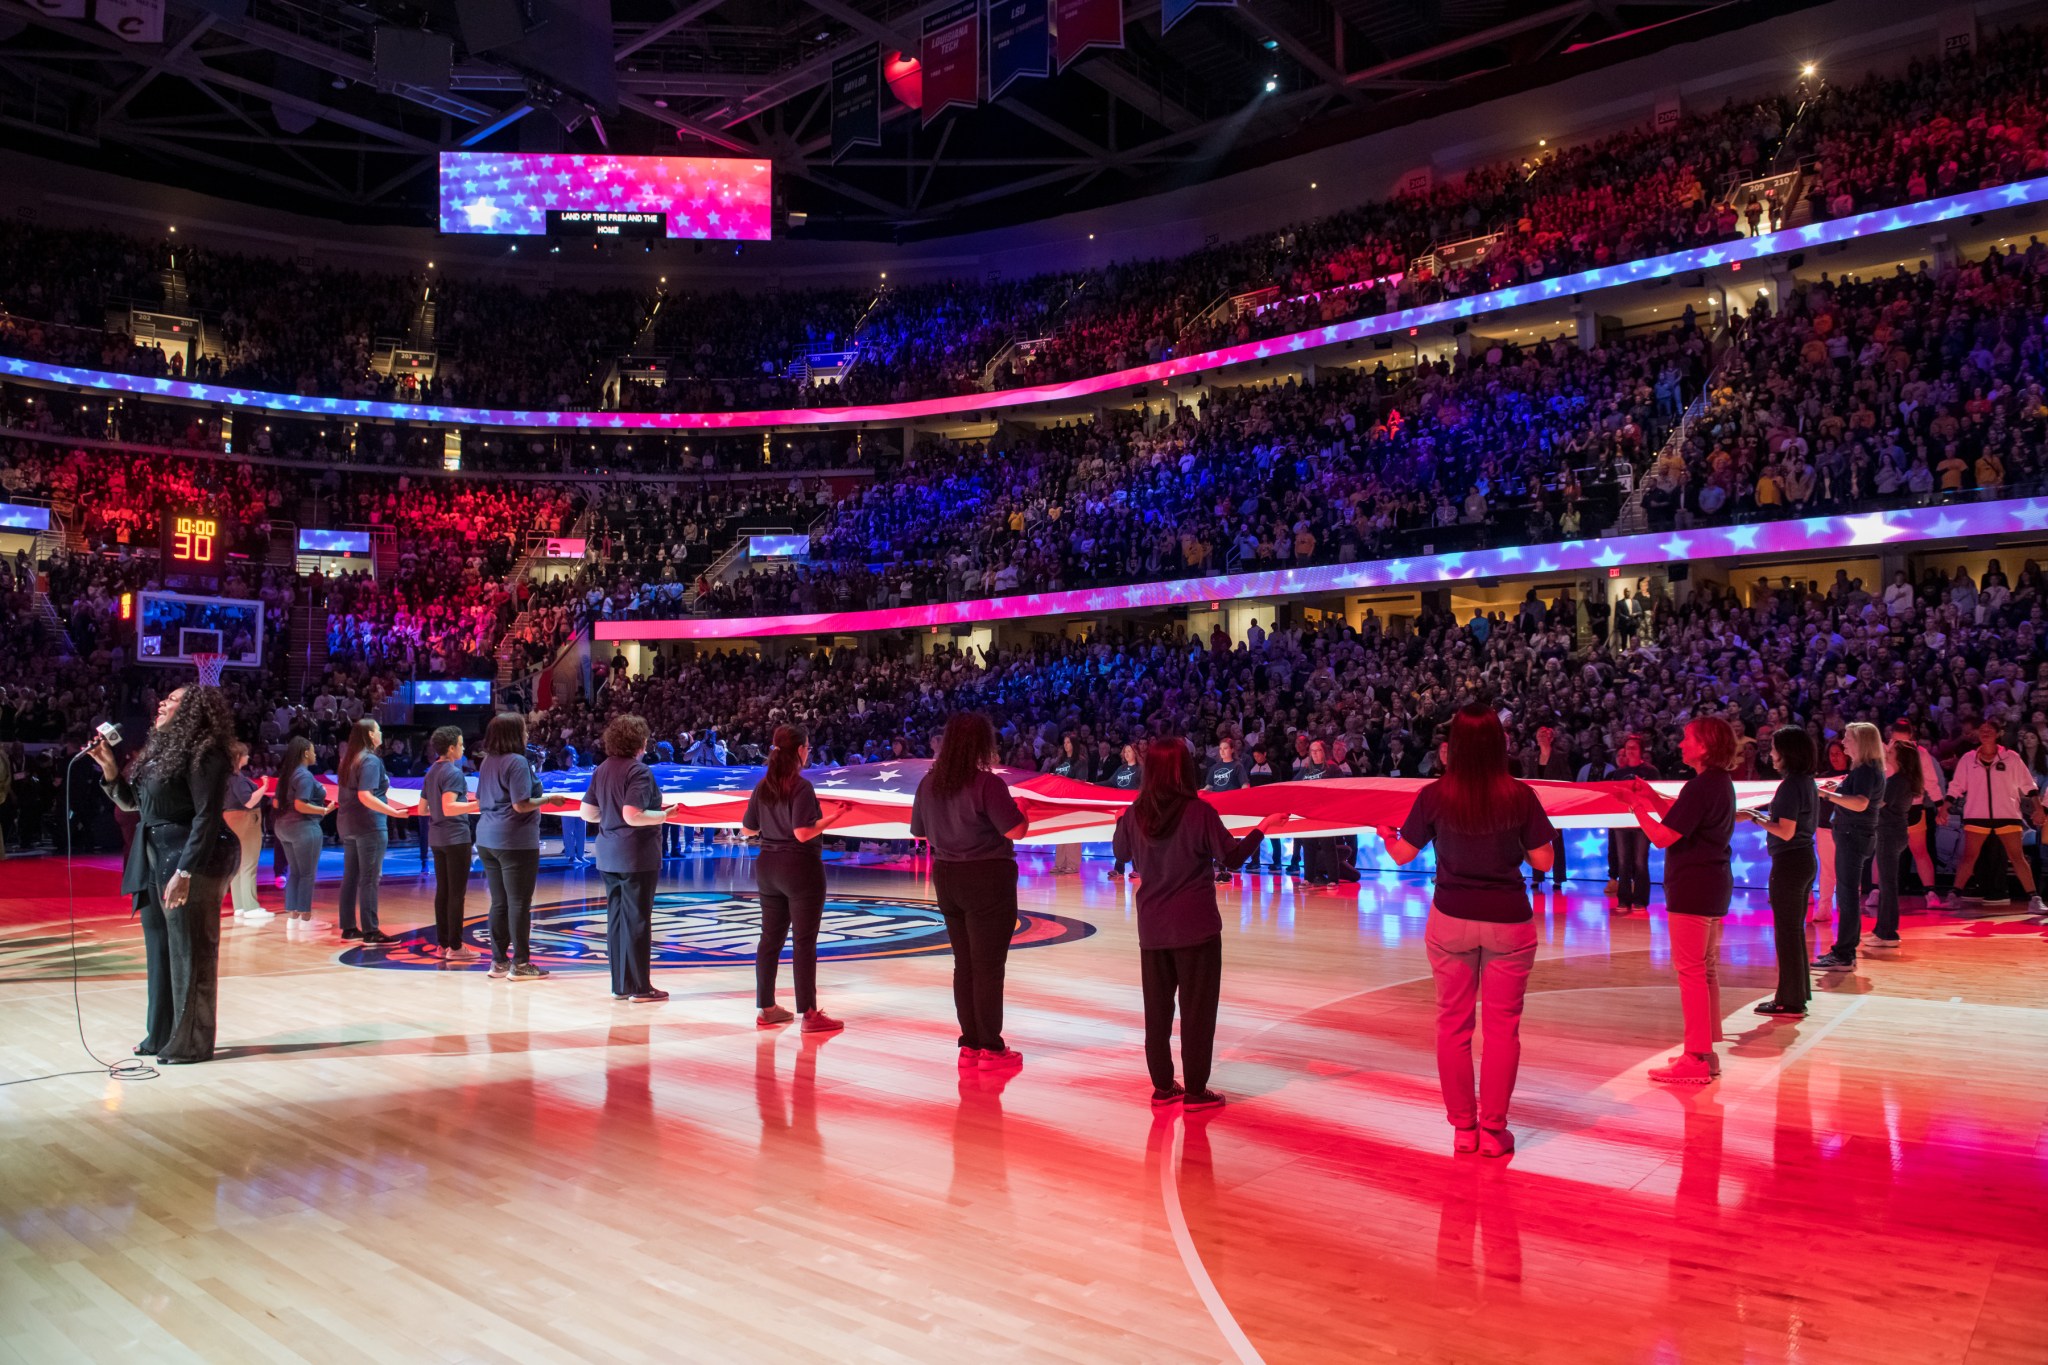 Several women hold ends of a large American flag on center court inside Rocket Mortgage FieldHouse. A woman stands at left singing the National Anthem. Red and blue lights illuminate the stage and stands full of guests. 